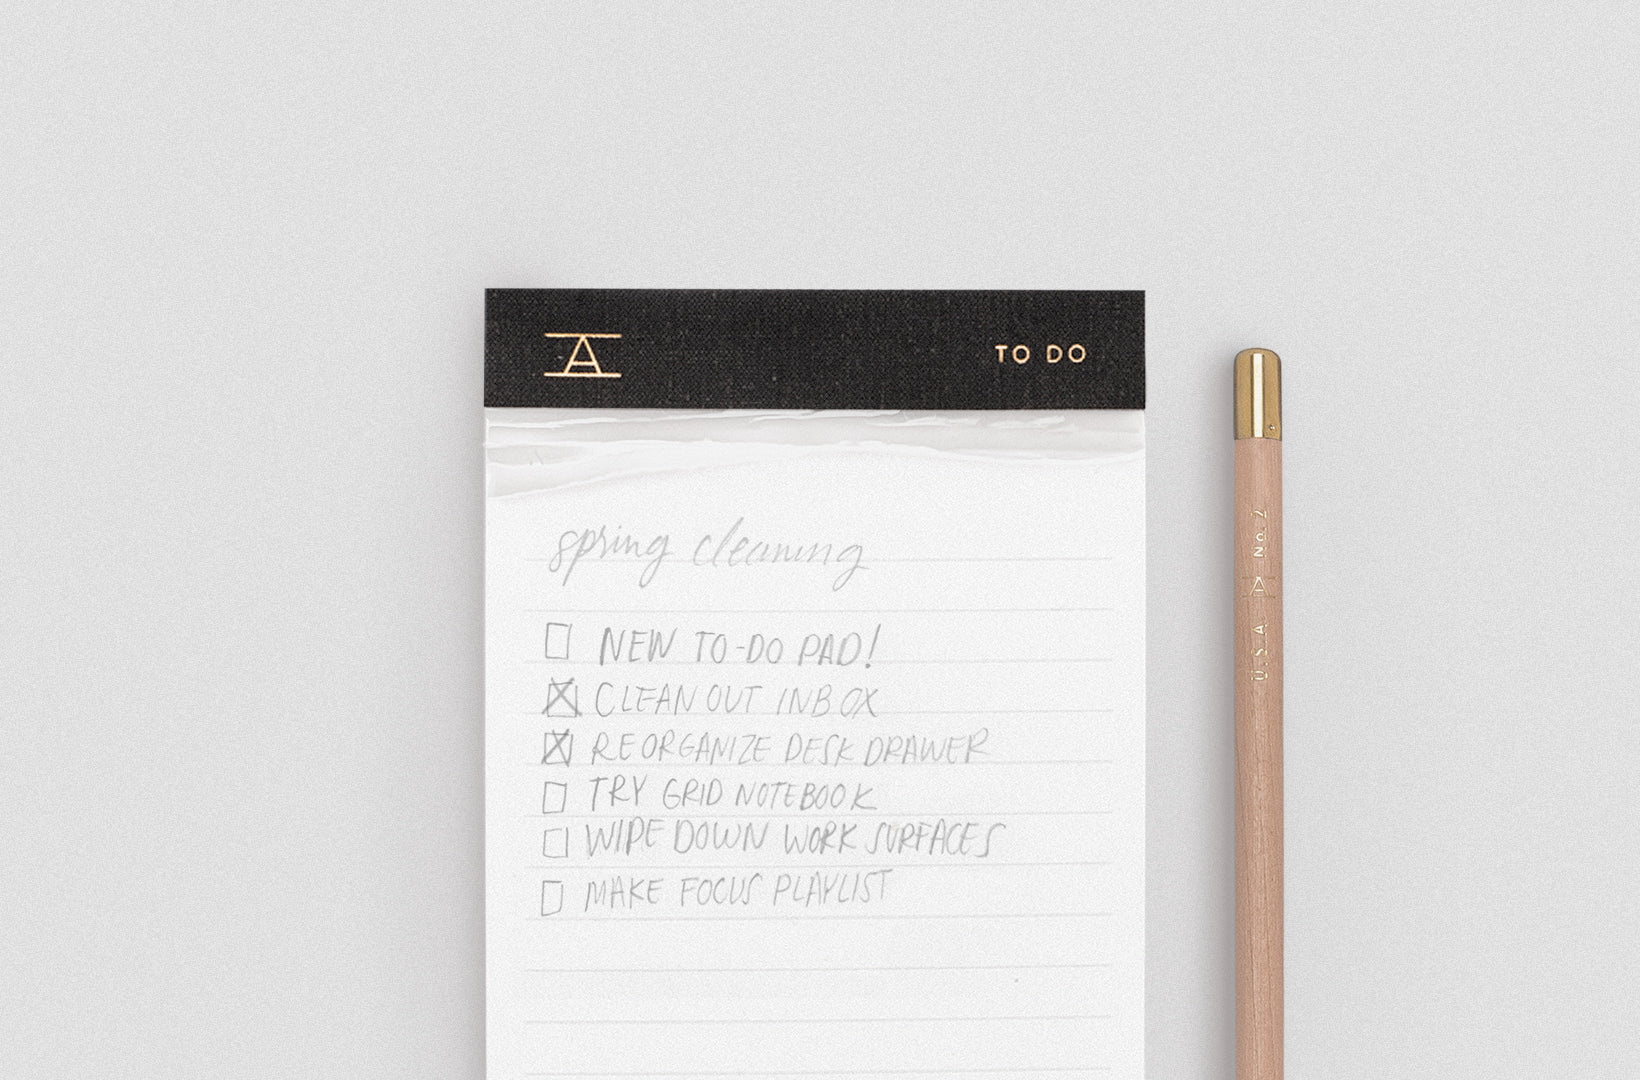 An Appointed To Do Pad with charcoal bookcloth binding and gold foil details sits against a gray back ground with a natural no. 2 pencil with gold cap sitting next to it. There is a to-do list scrawled in pencil on the pad and you can see the remnants of previous torn pages